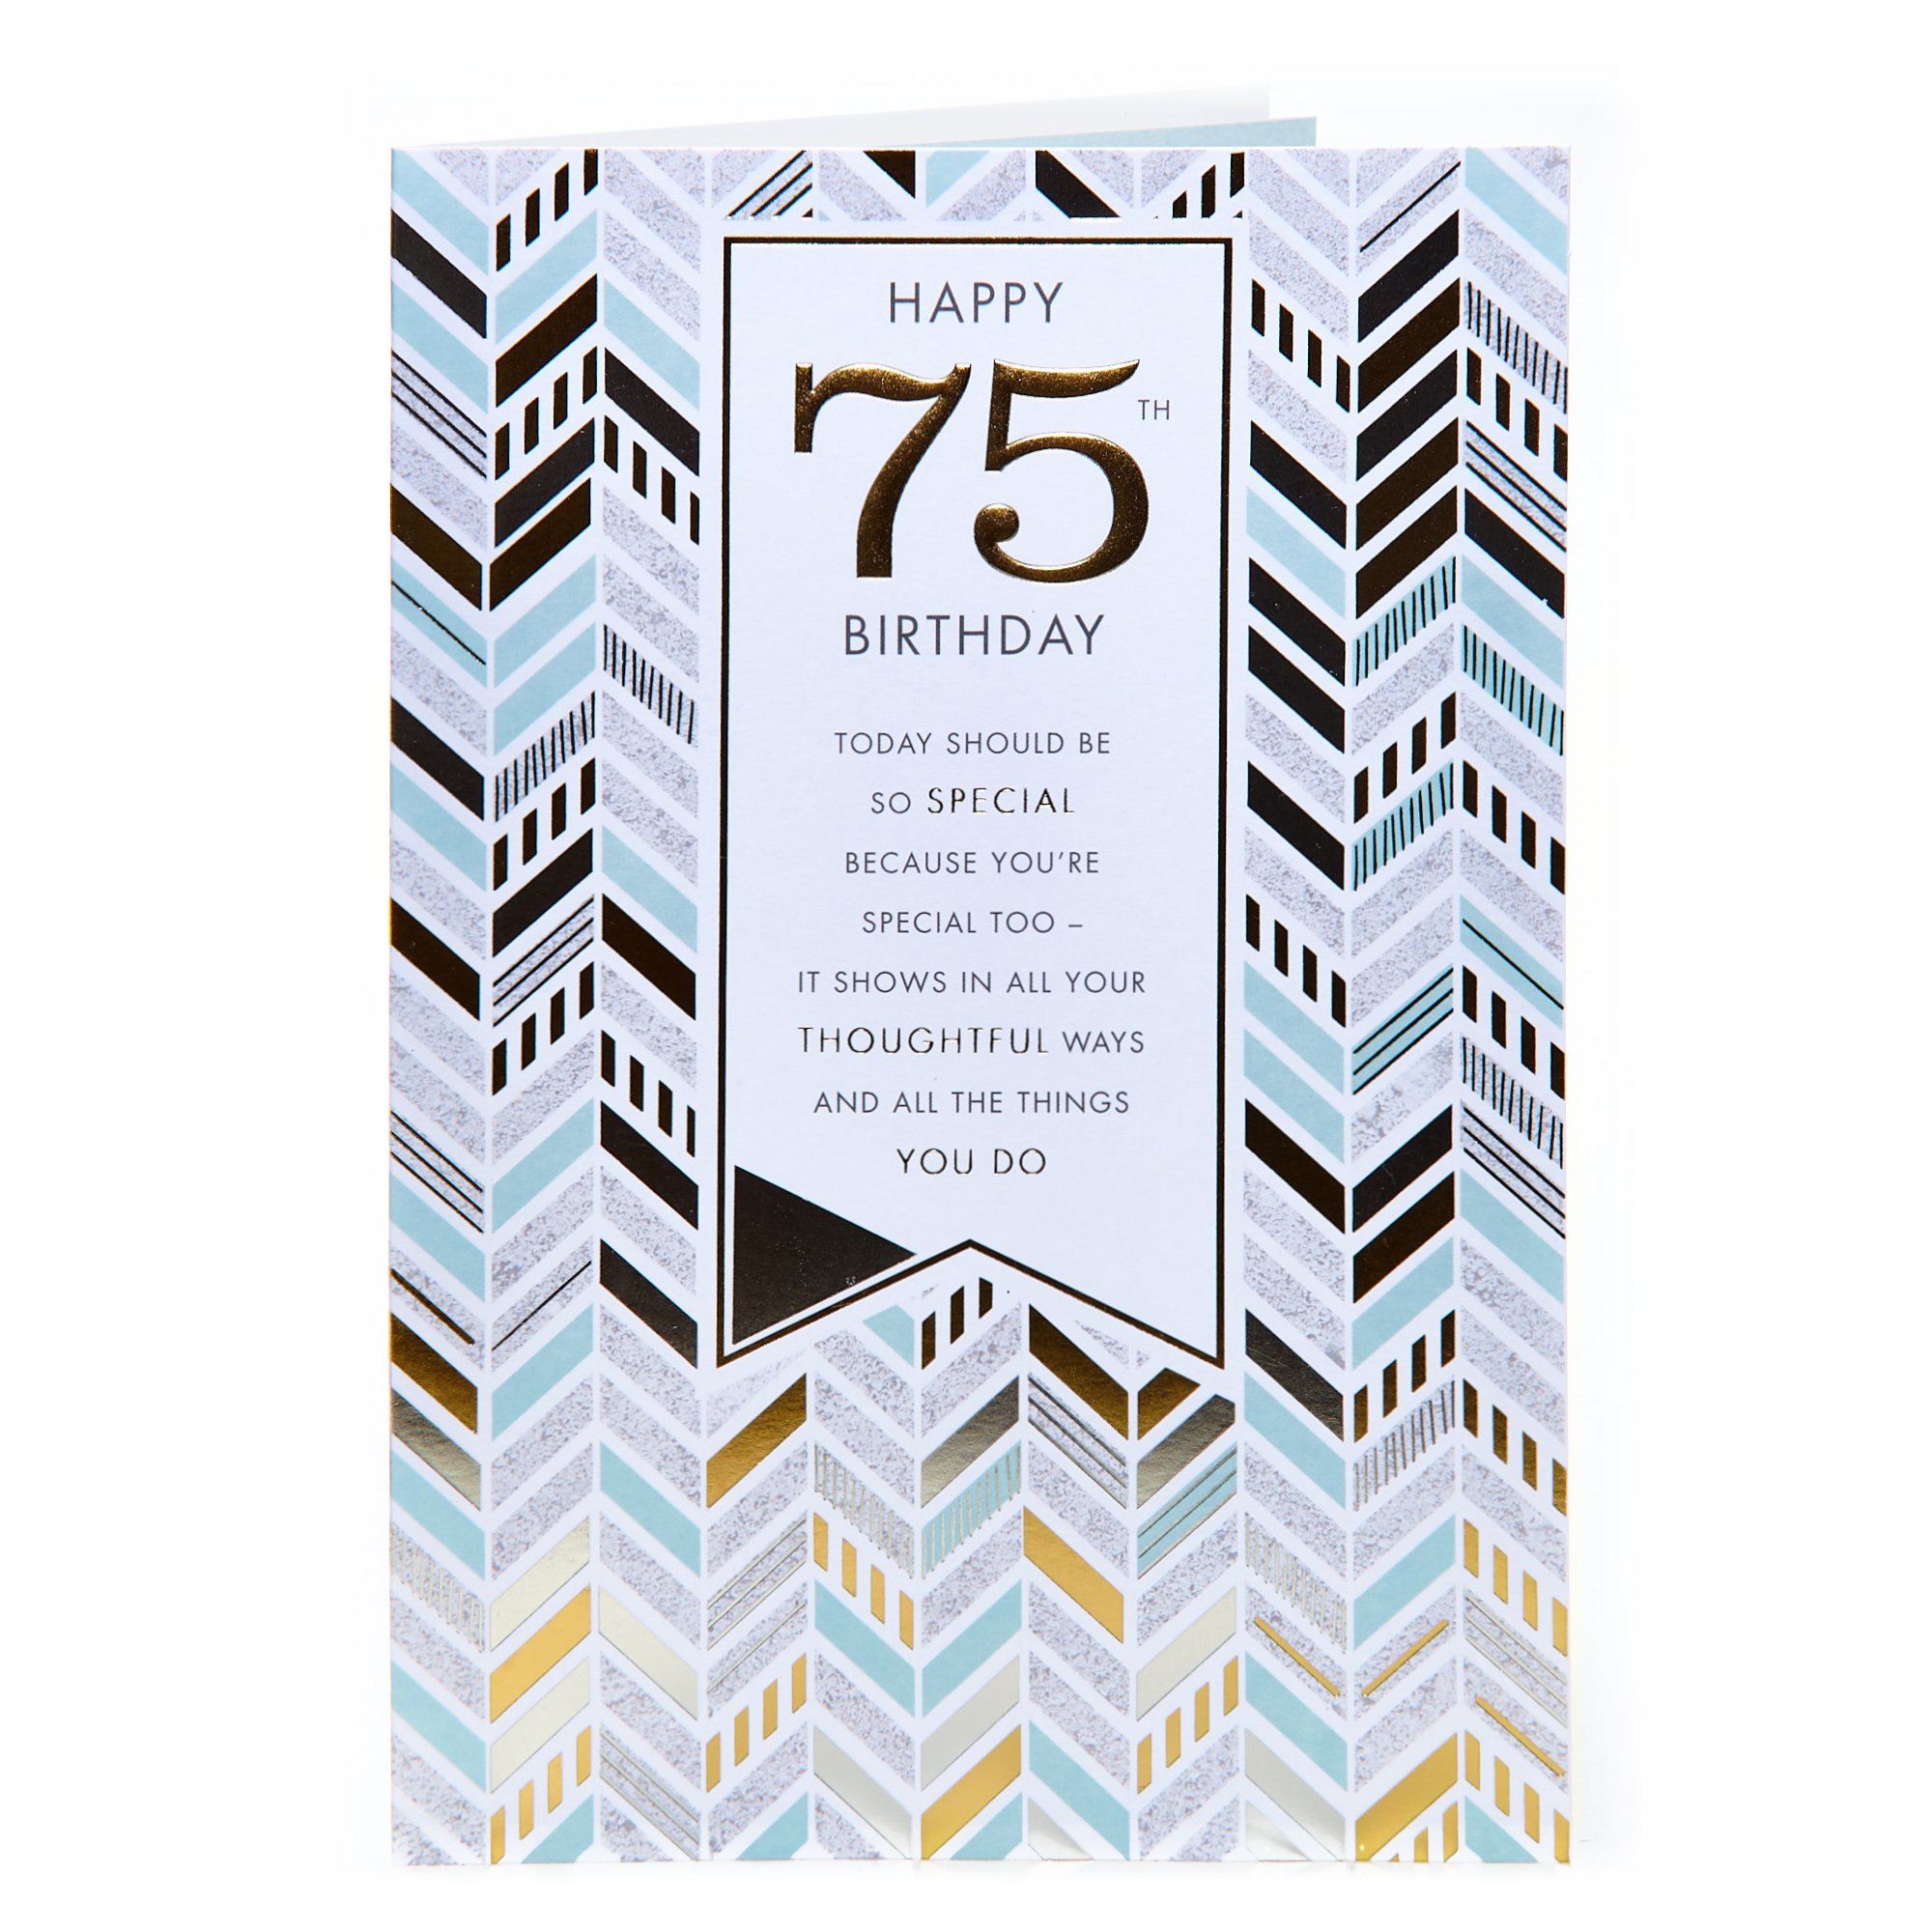 Buy 75th Birthday Card Today Should Be Special For Gbp 099 Card